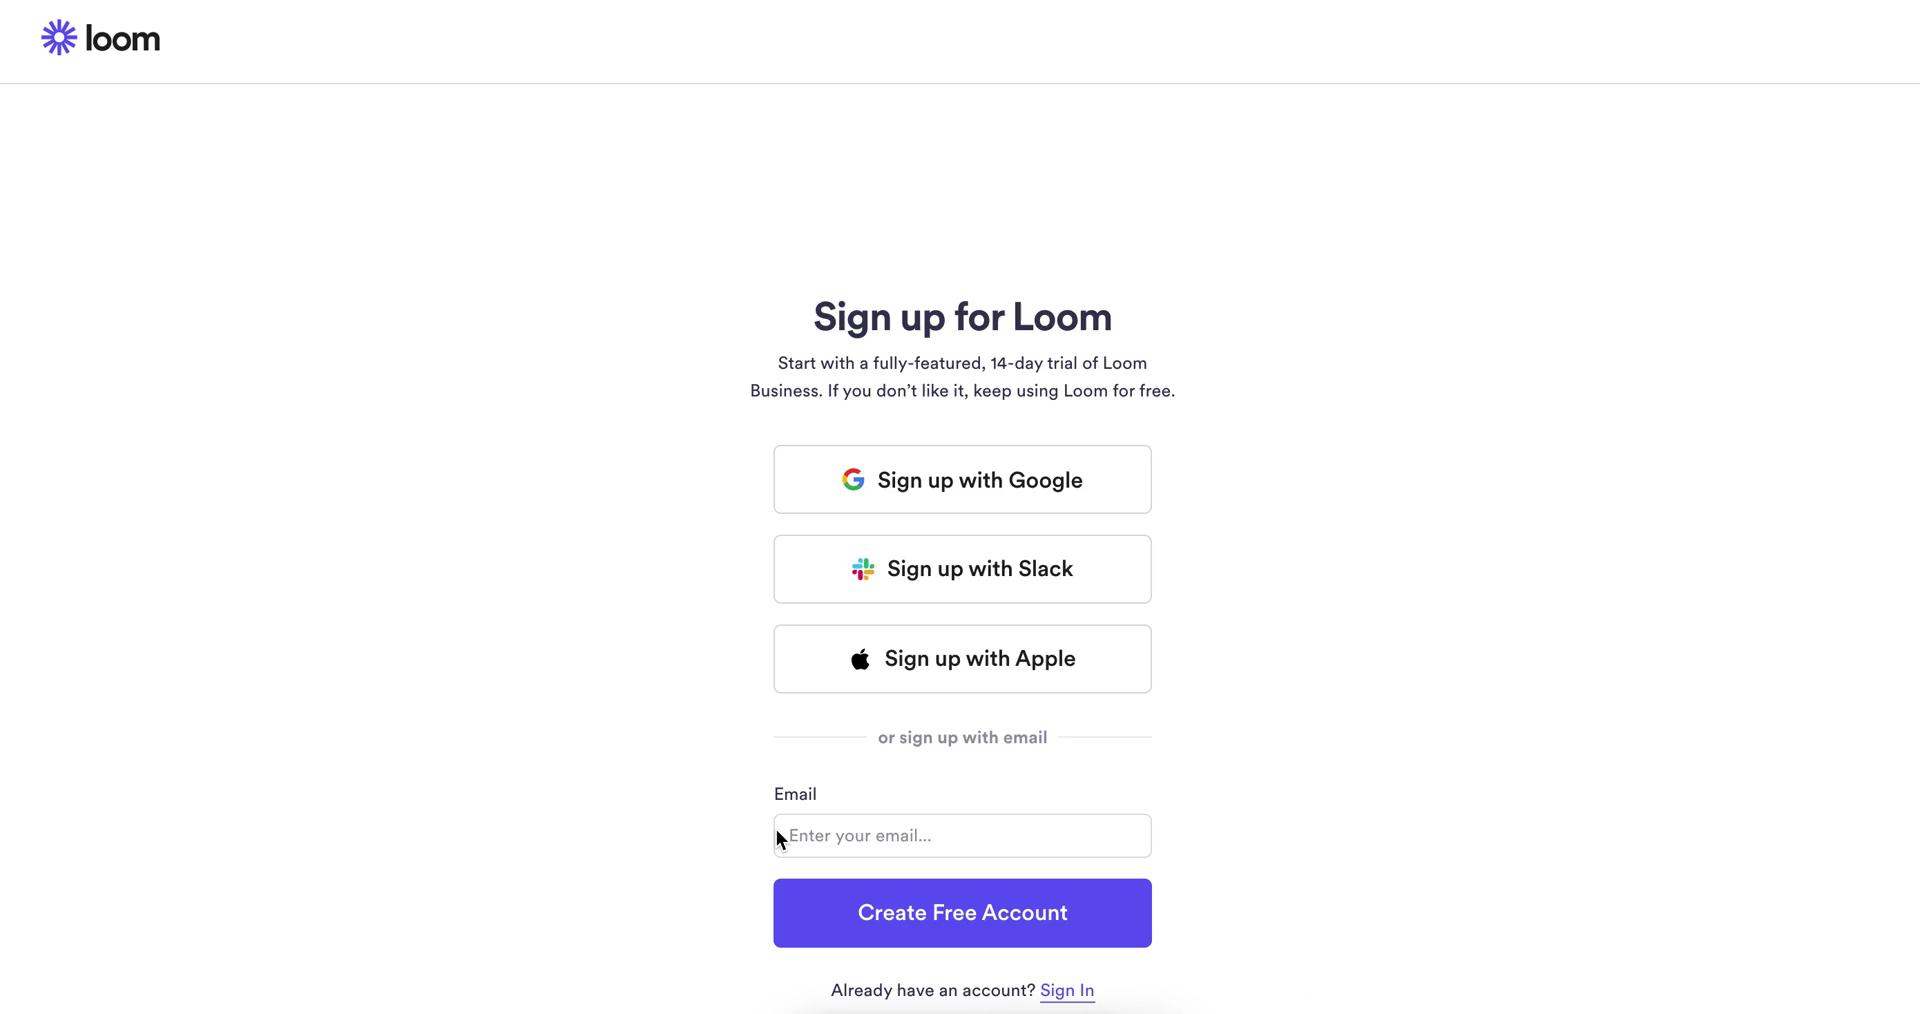 How to sign in with email, Google, Slack, or Apple – Loom